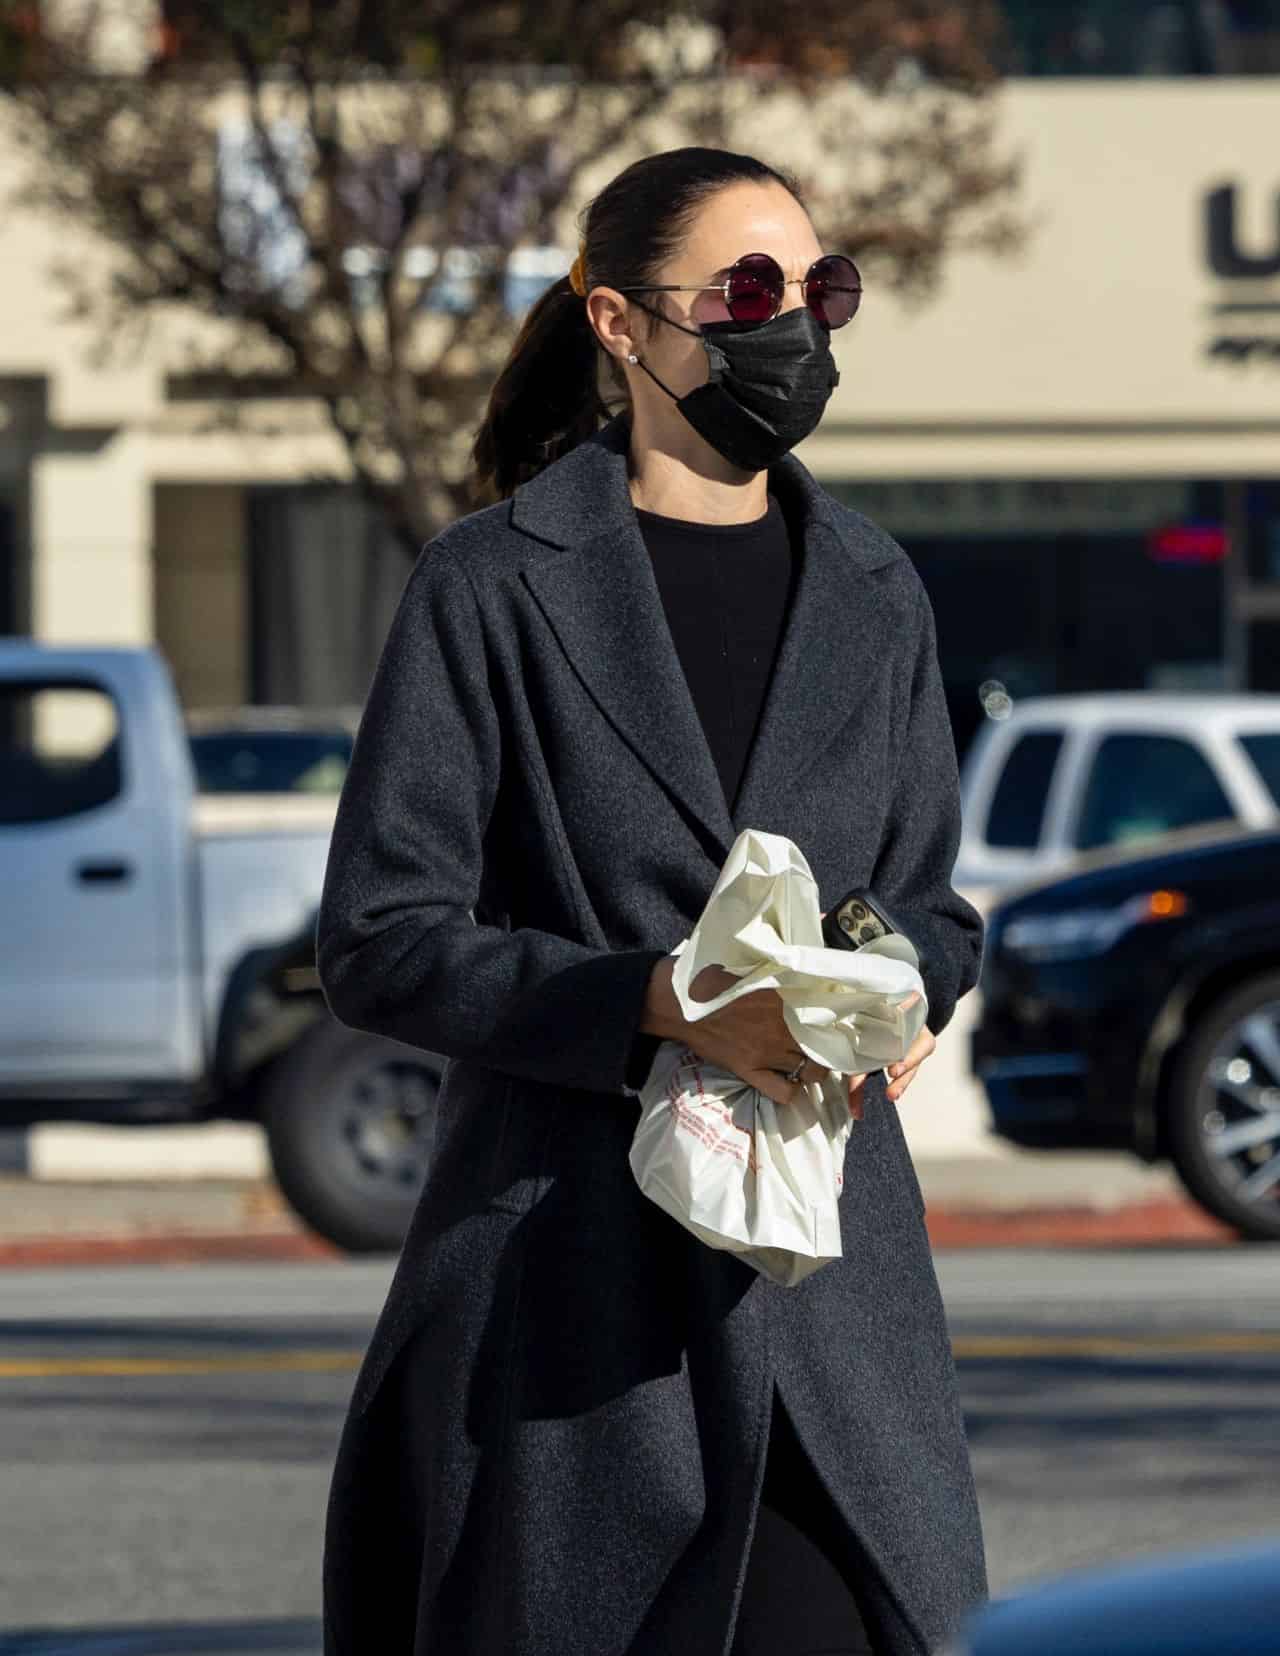 Gal Gadot Looked Stylish in a Dark Gray Coat when she Went Shopping in LA